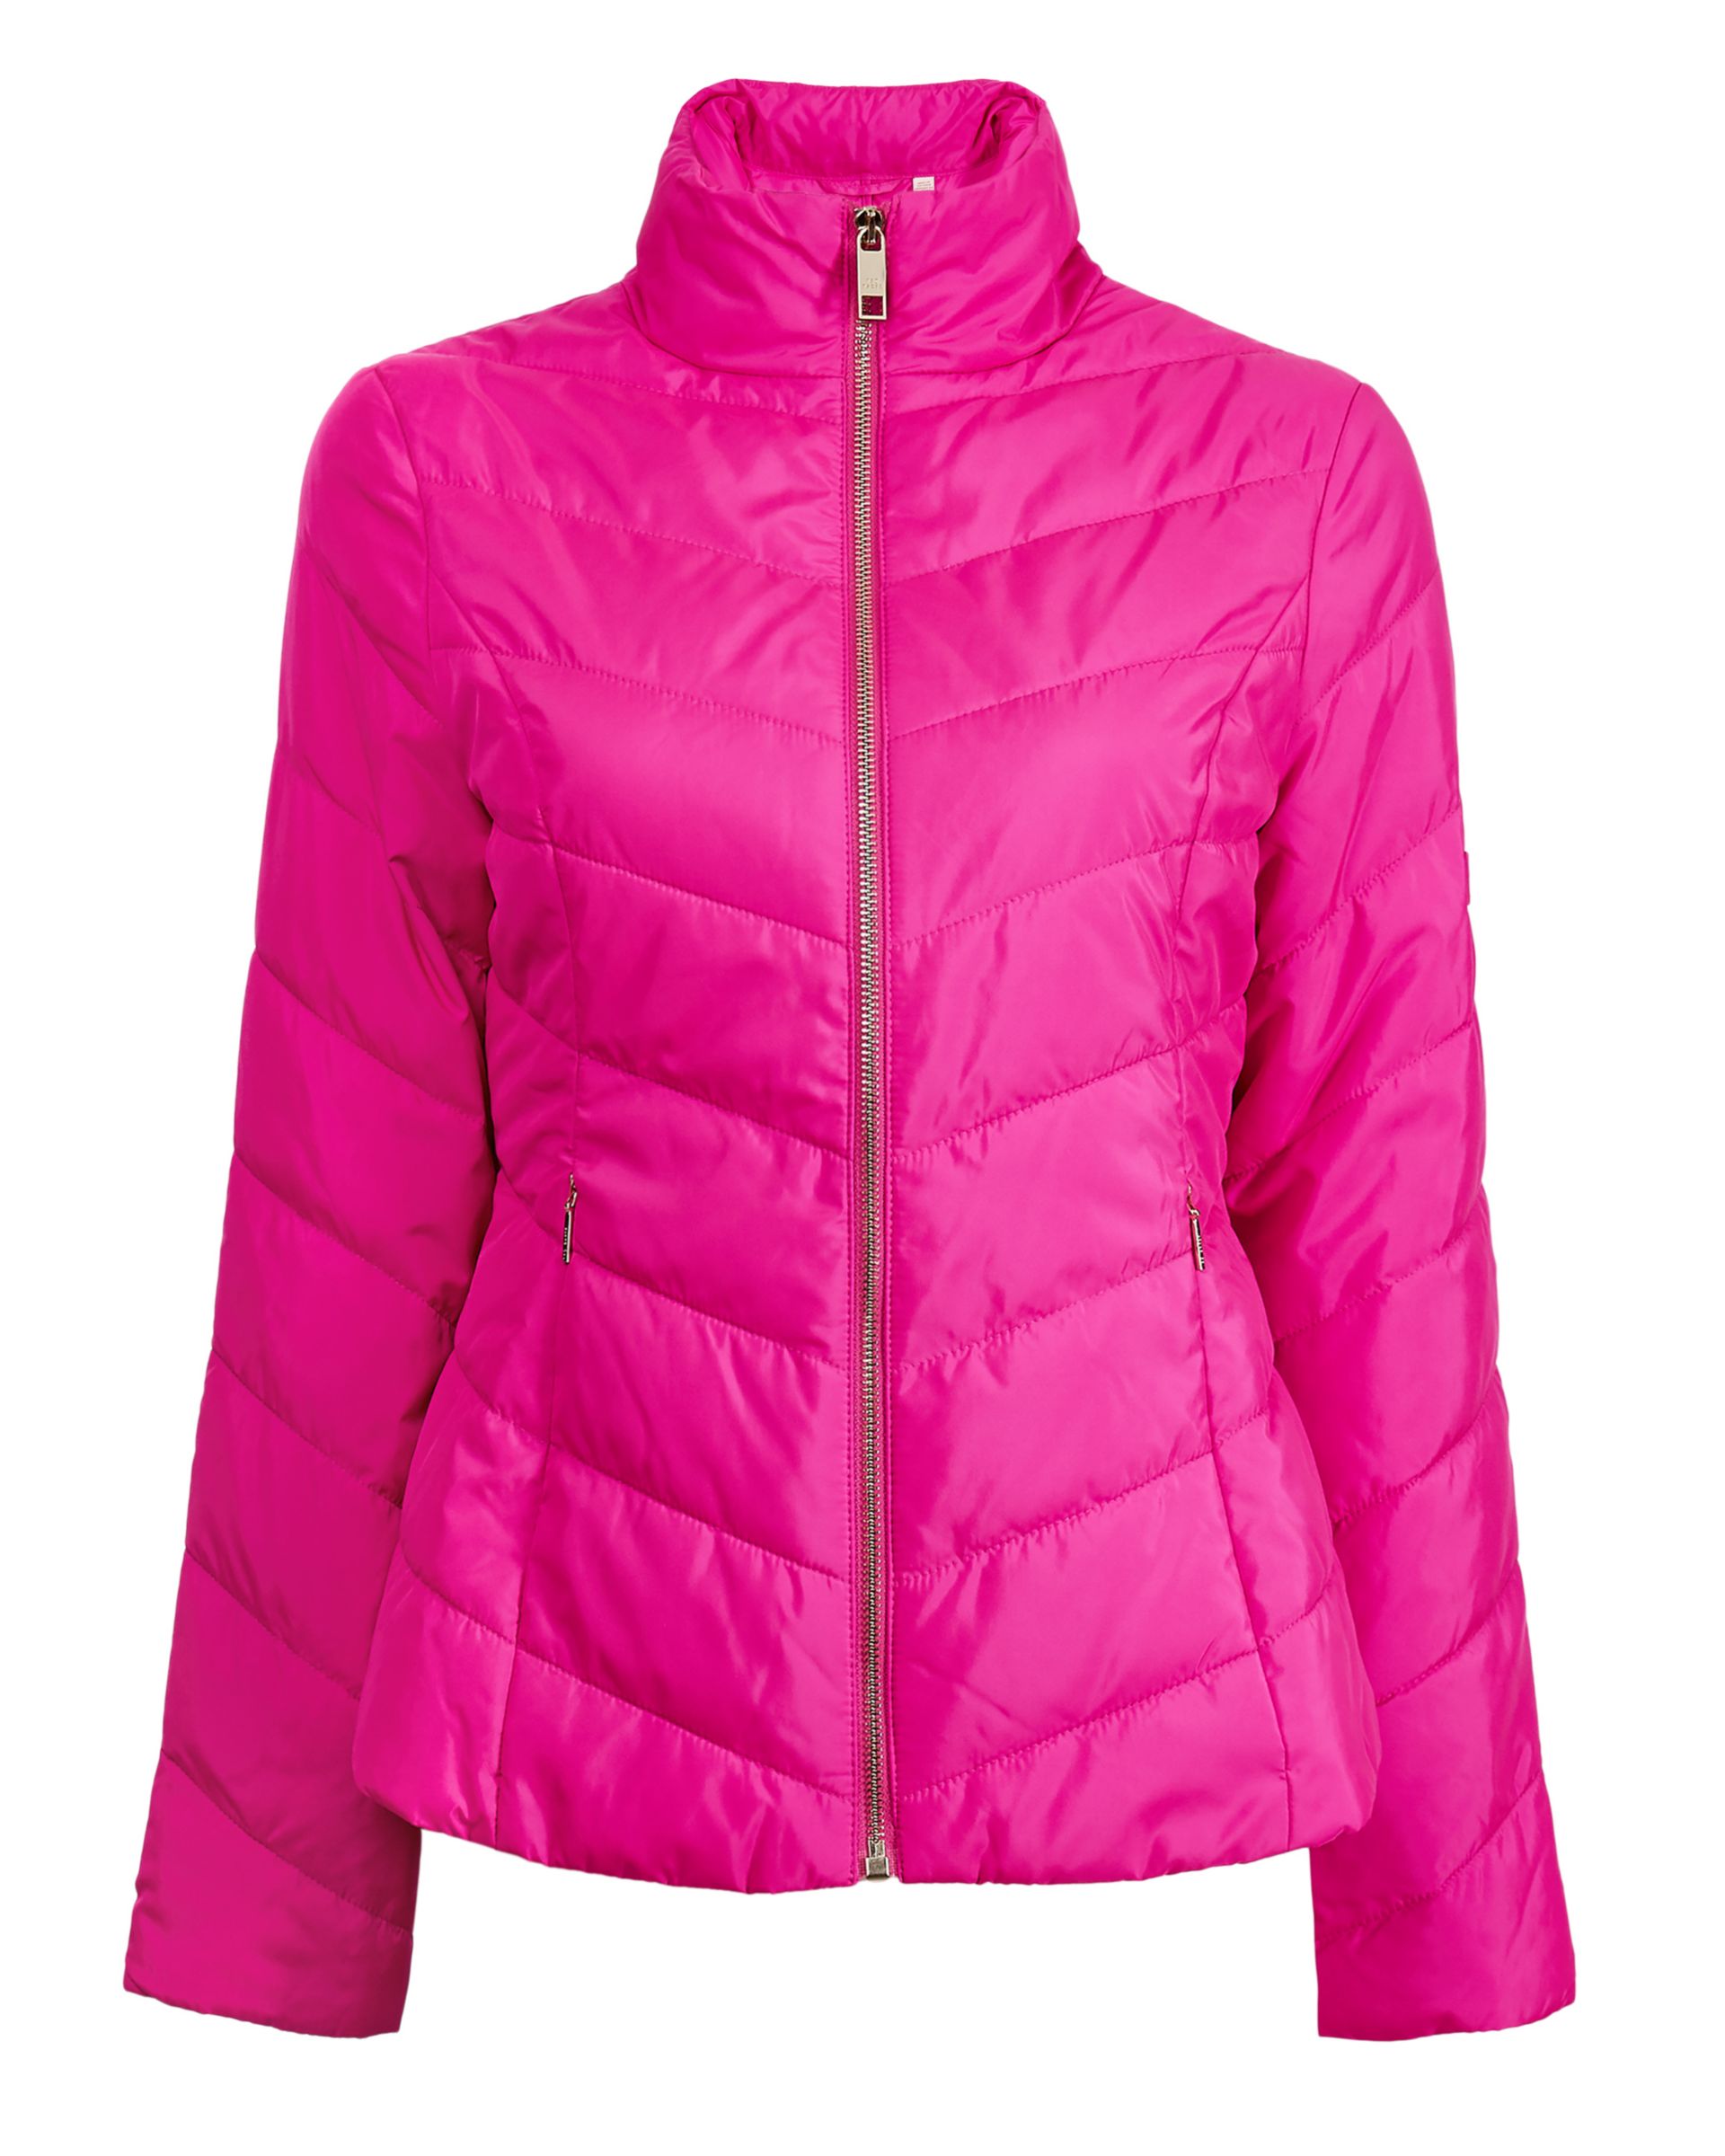 Ted Baker Renika Short Quilted Jacket, Hot Pink at John Lewis & Partners